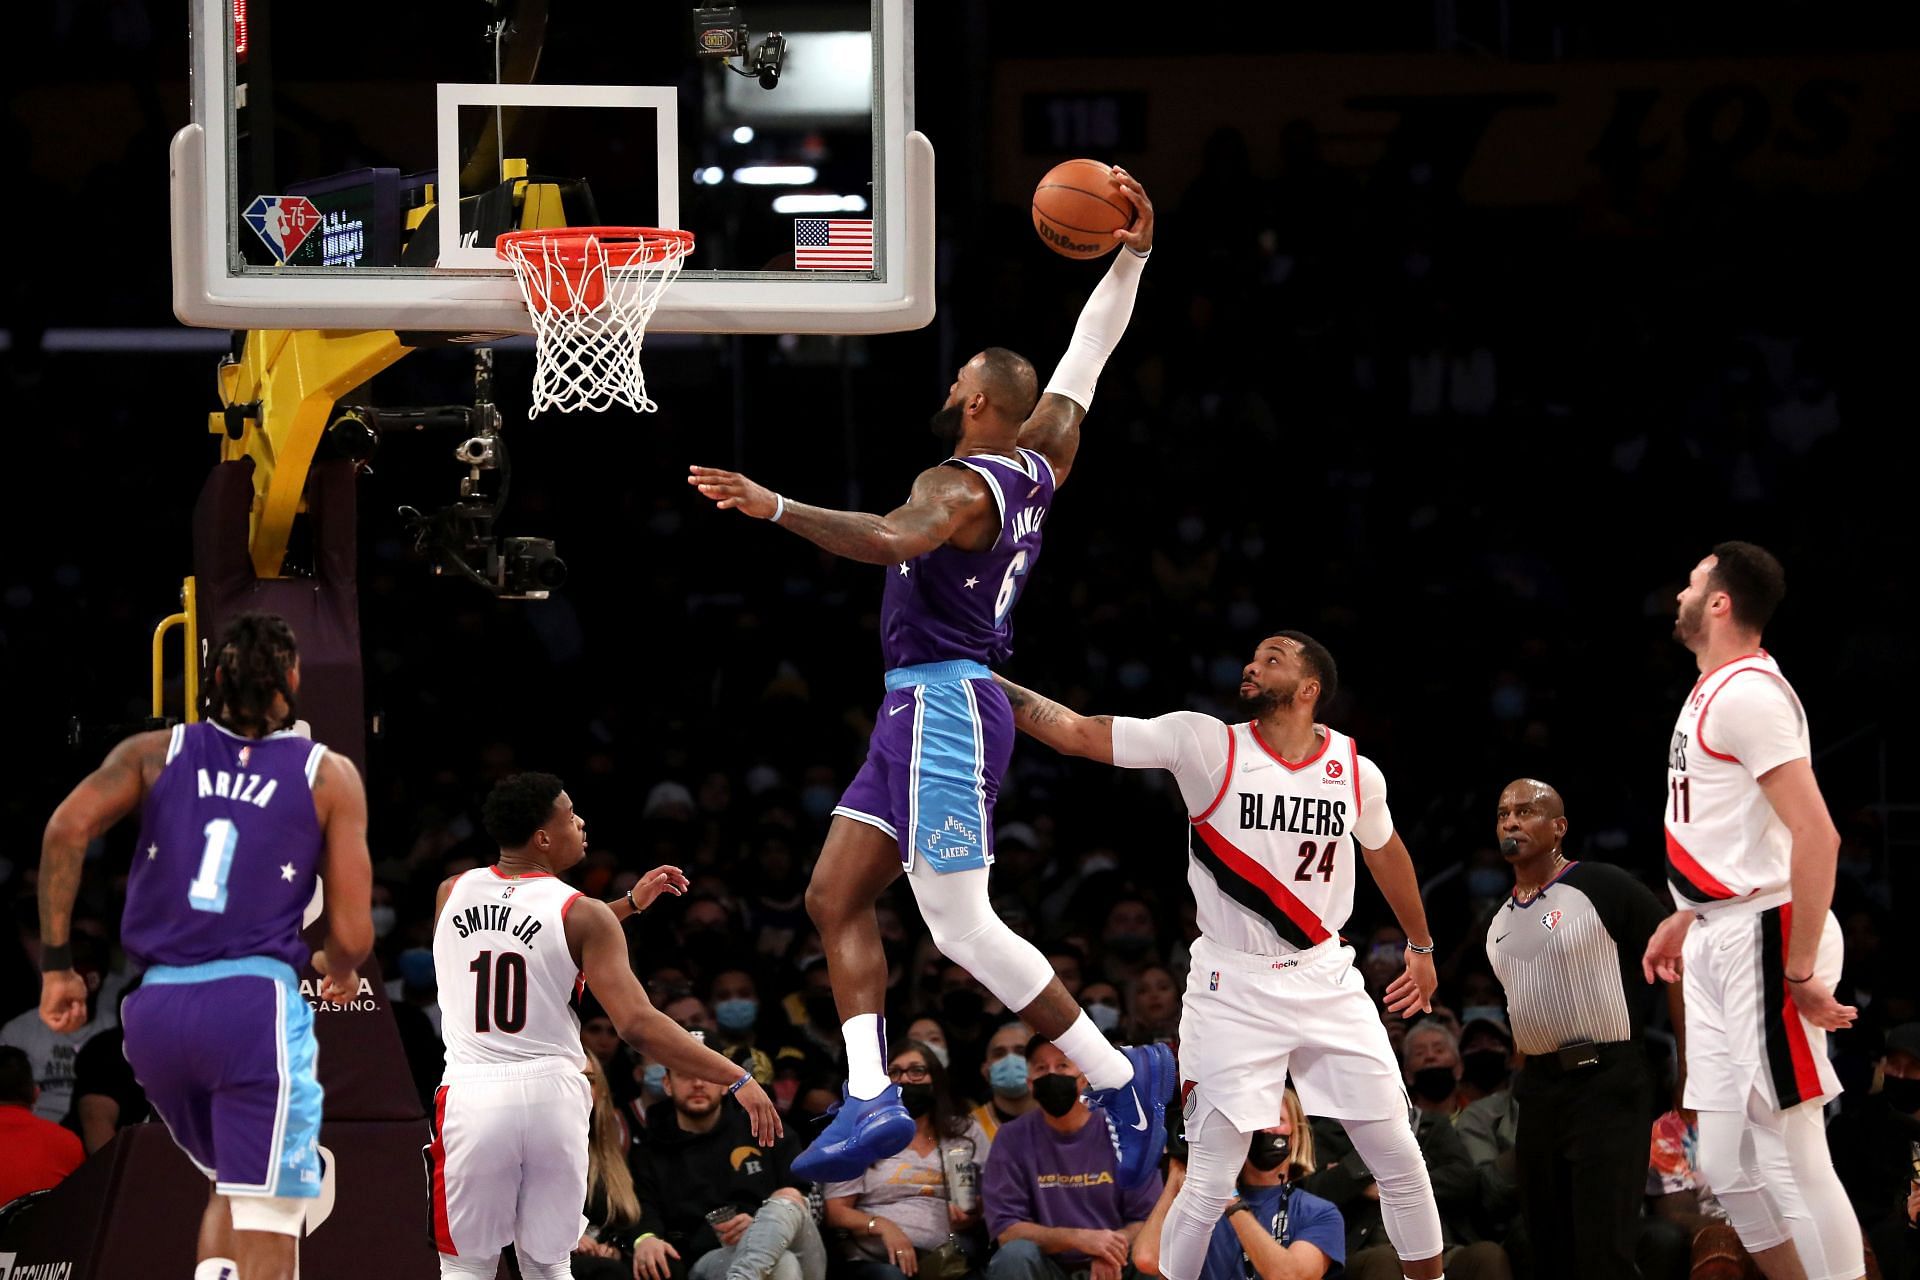 LeBron James of the Los Angeles Lakers dunking against the Portland Trail Blazers.